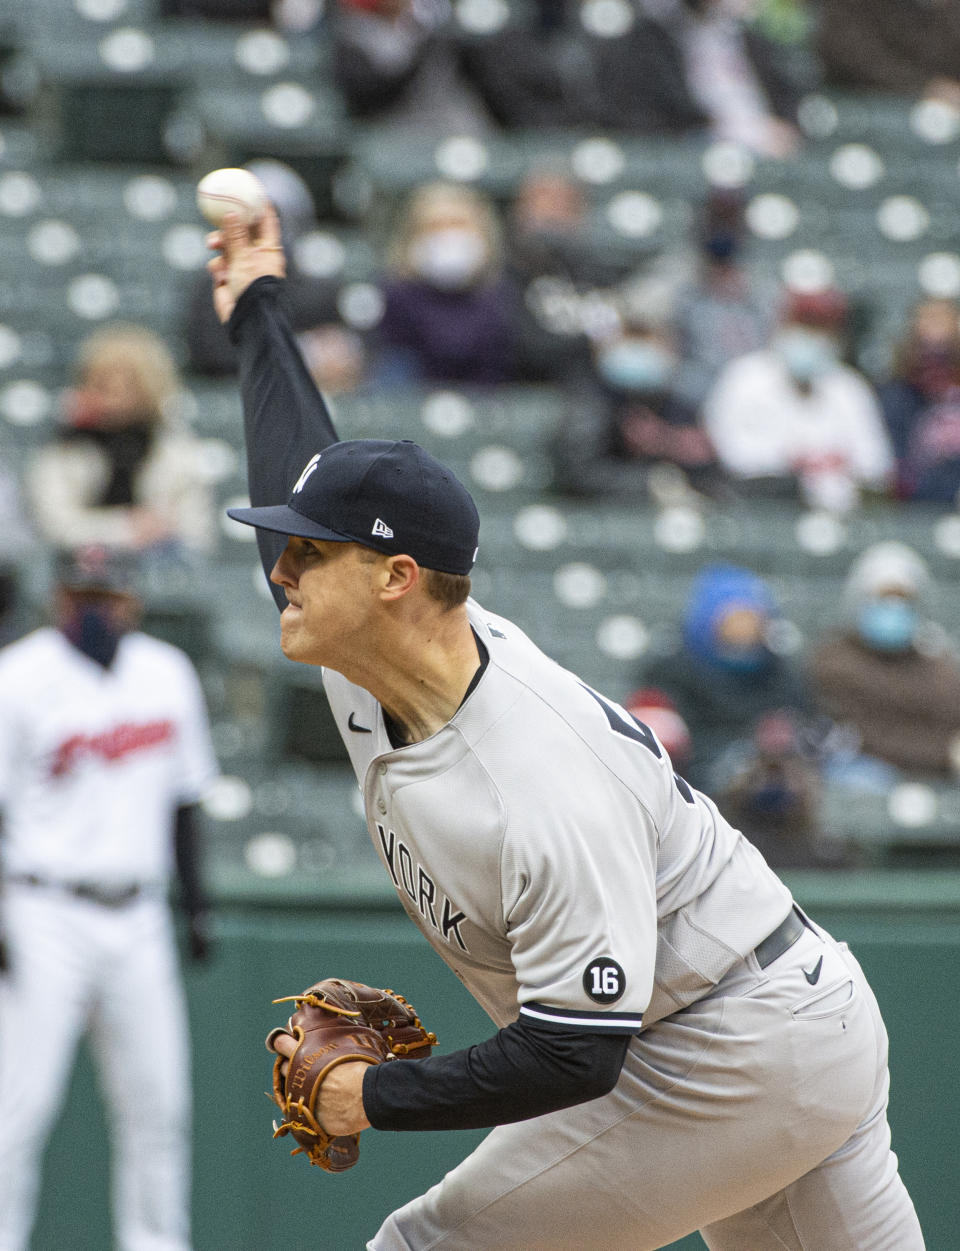 New York Yankees starting pitcher Jameson Taillon delivers against the Cleveland Indians during the first second inning of a baseball game in Cleveland, Sunday, April 25, 2021. (AP Photo/Phil Long)